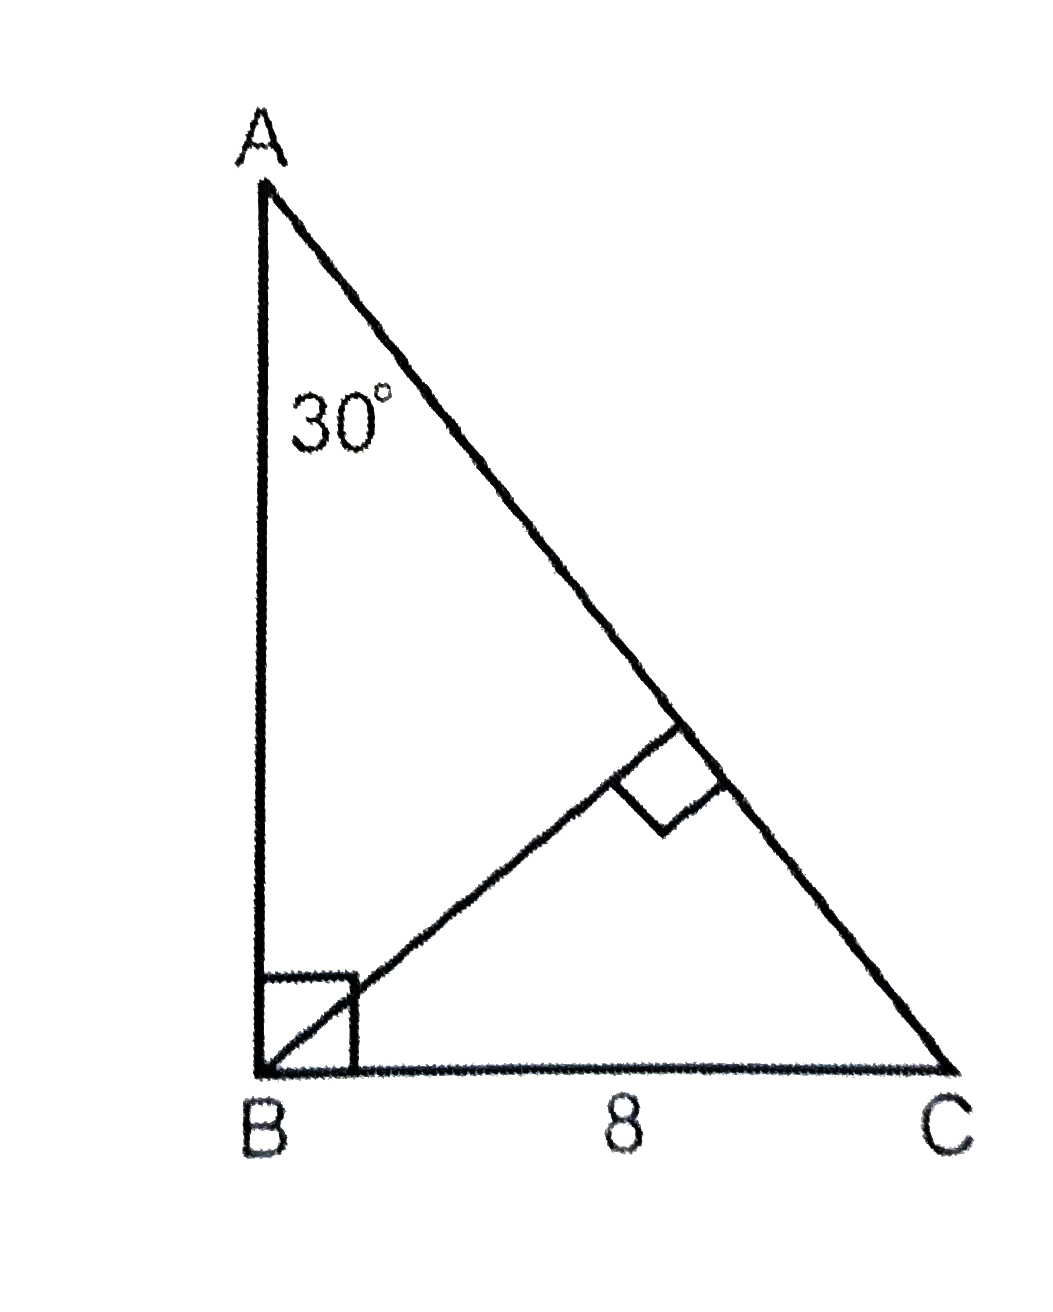 In the figure shown, ABC is a triangle, right angled at B. Through B, a line is drawn perpendicular to AC which meets AC in D. What is the length of BD?